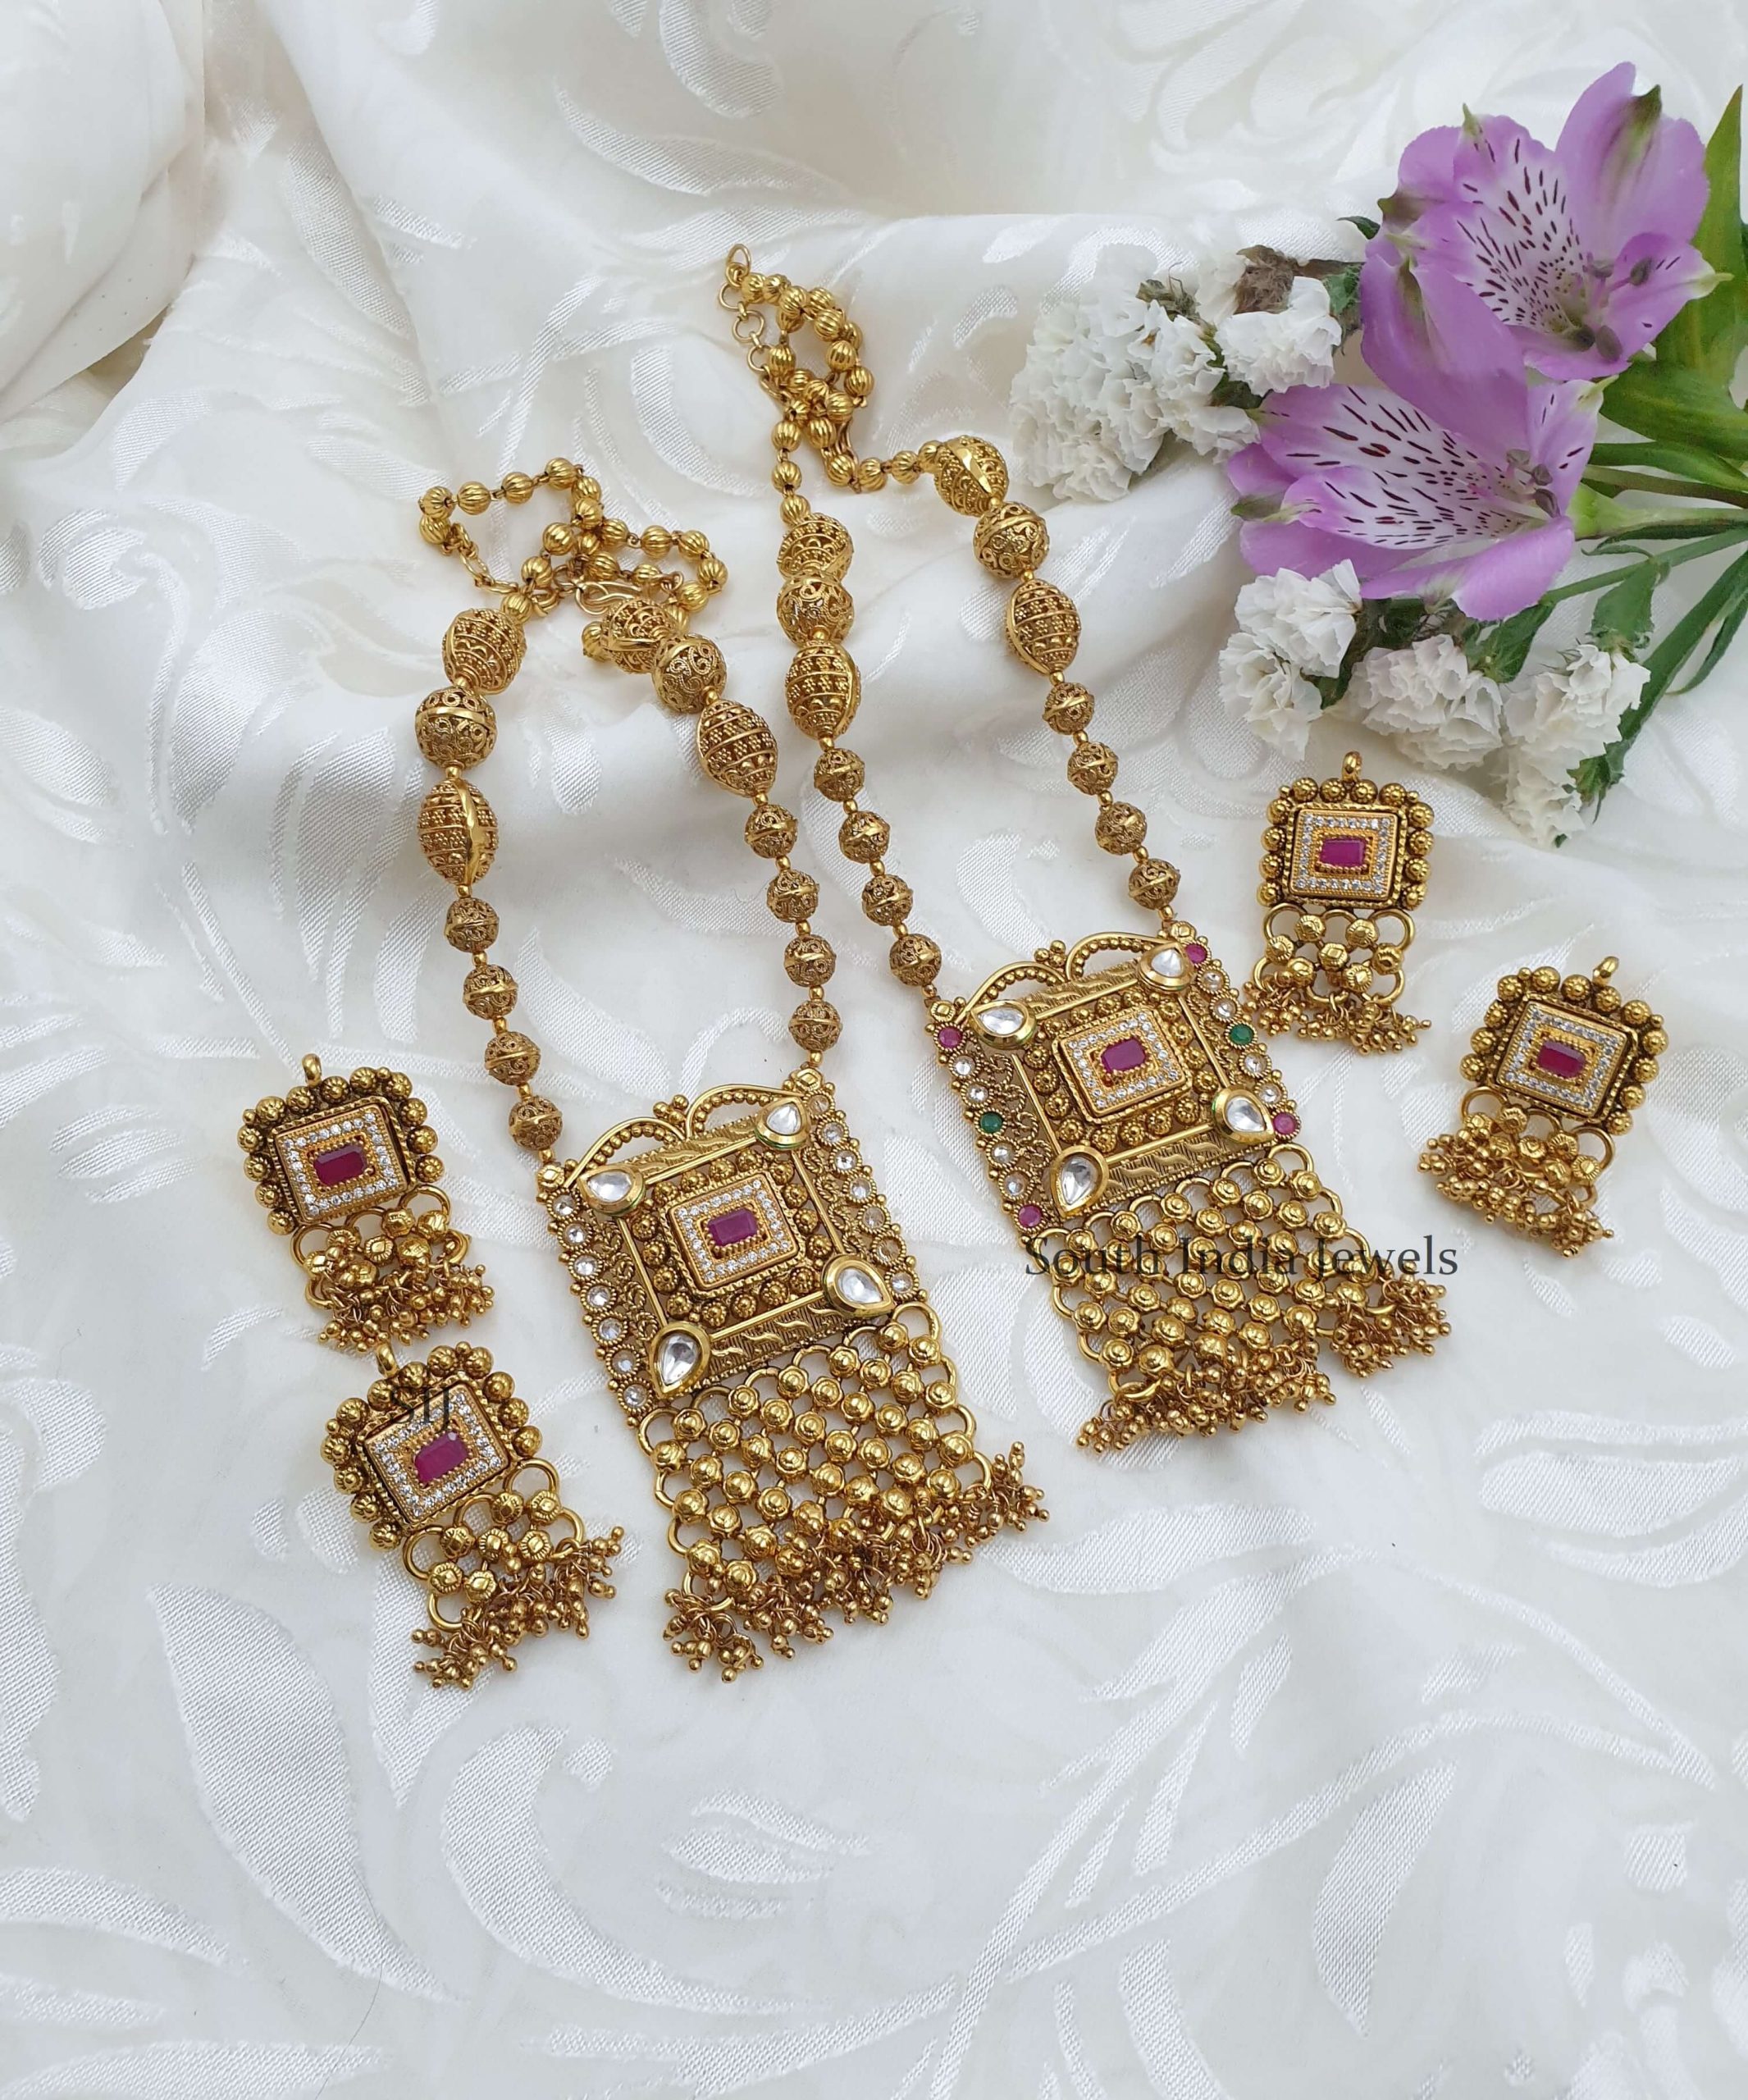 Beautiful Antique Beads Necklace (7)